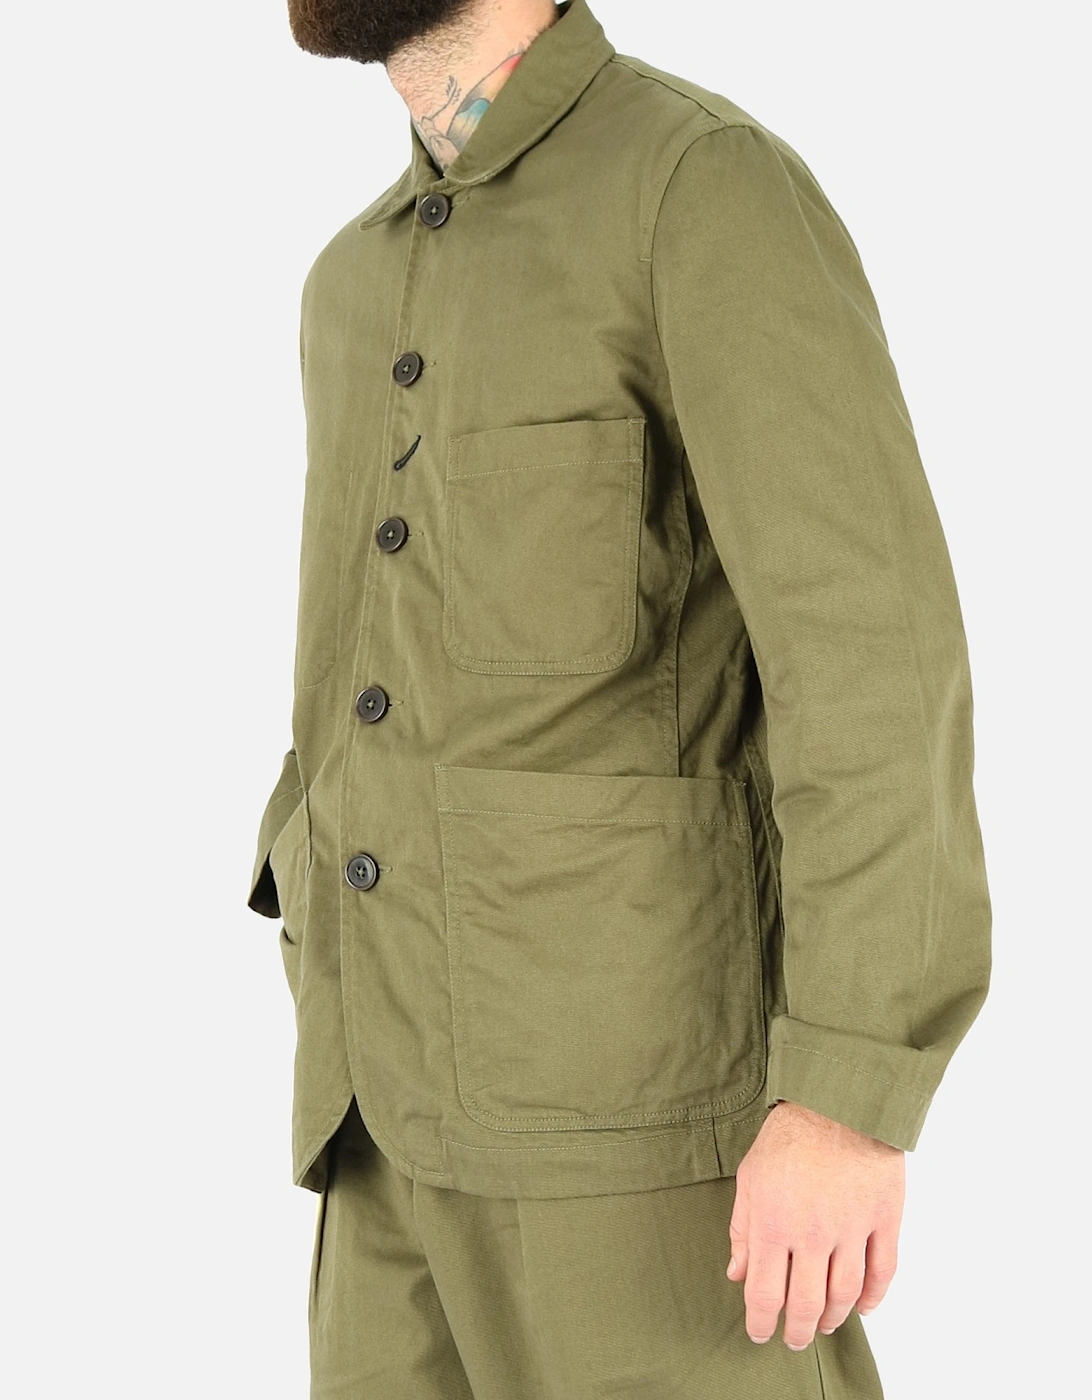 Bakers Twill Olive Green Jacket